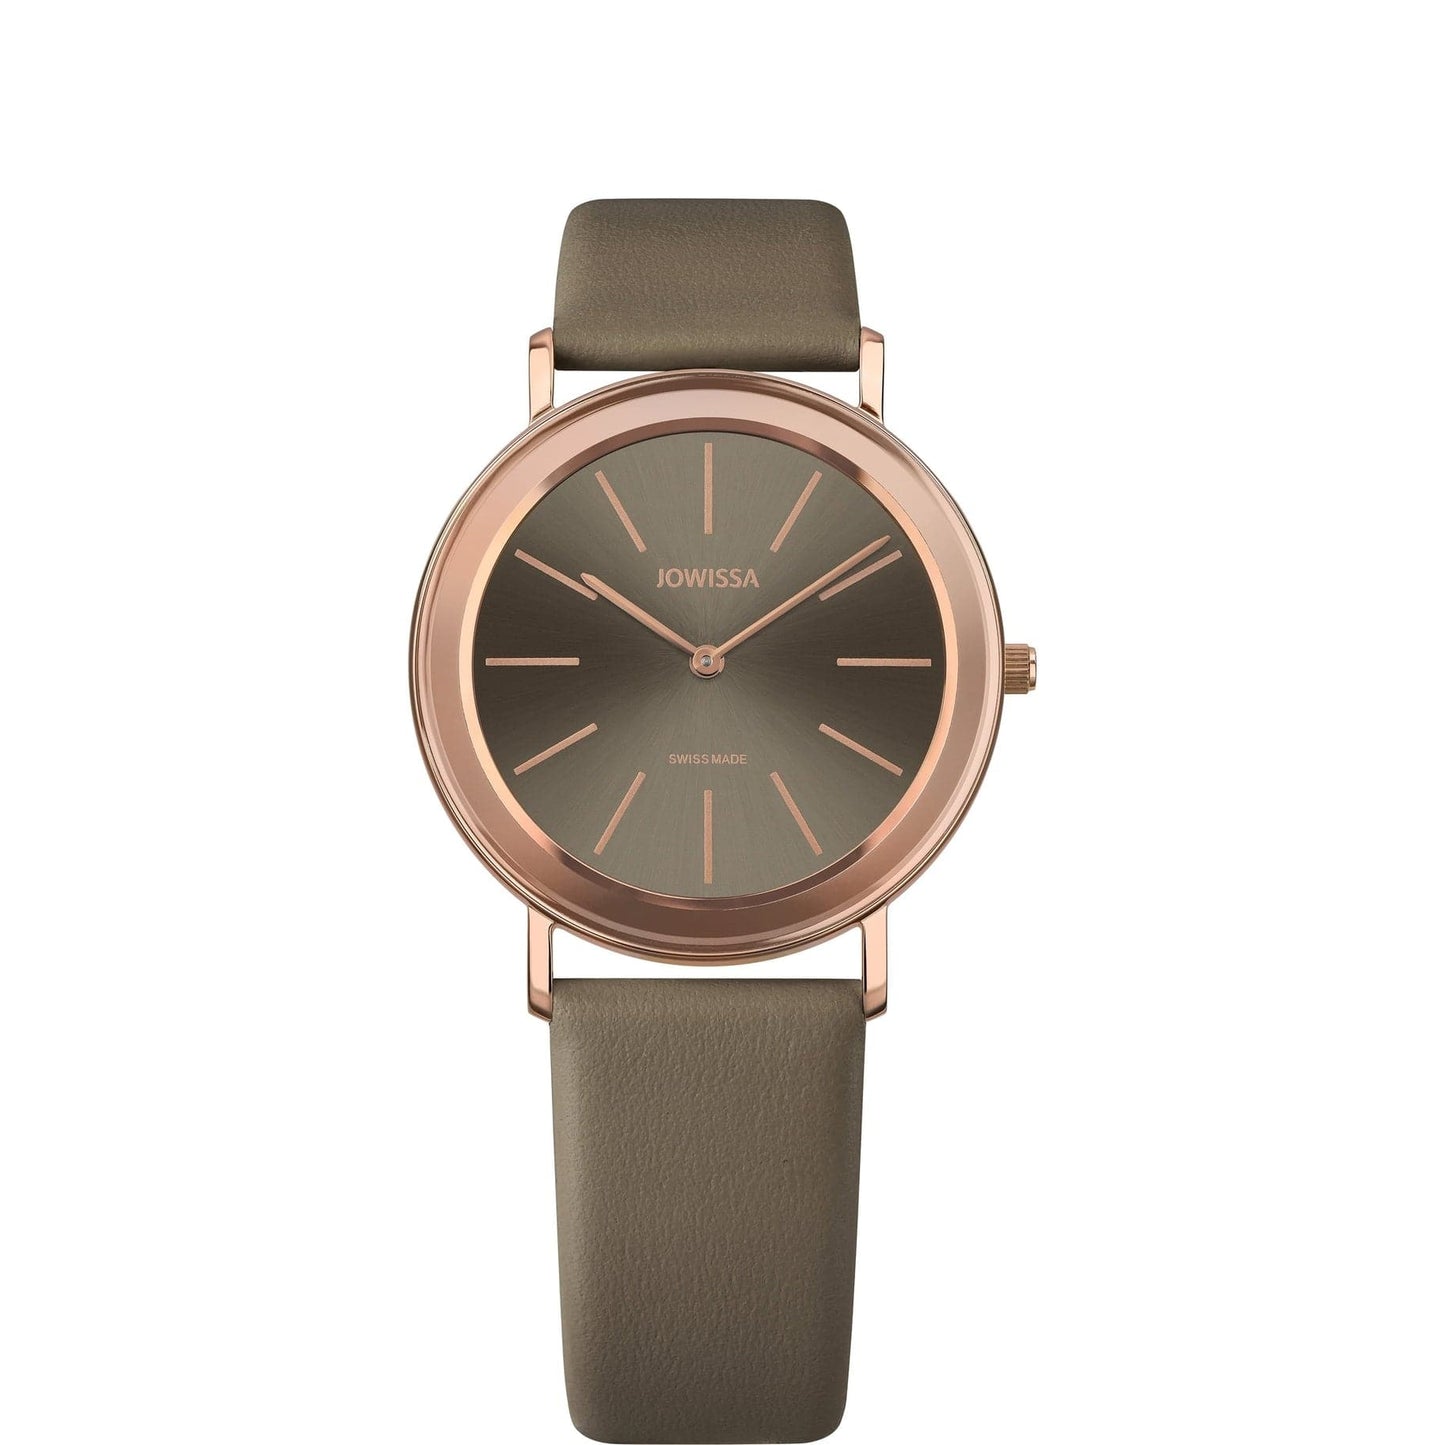 Alto Petite Ladies Watch from Jowissa - 35mm dial w/Leather Straps - Minutes Hours Days Watch Emporium 